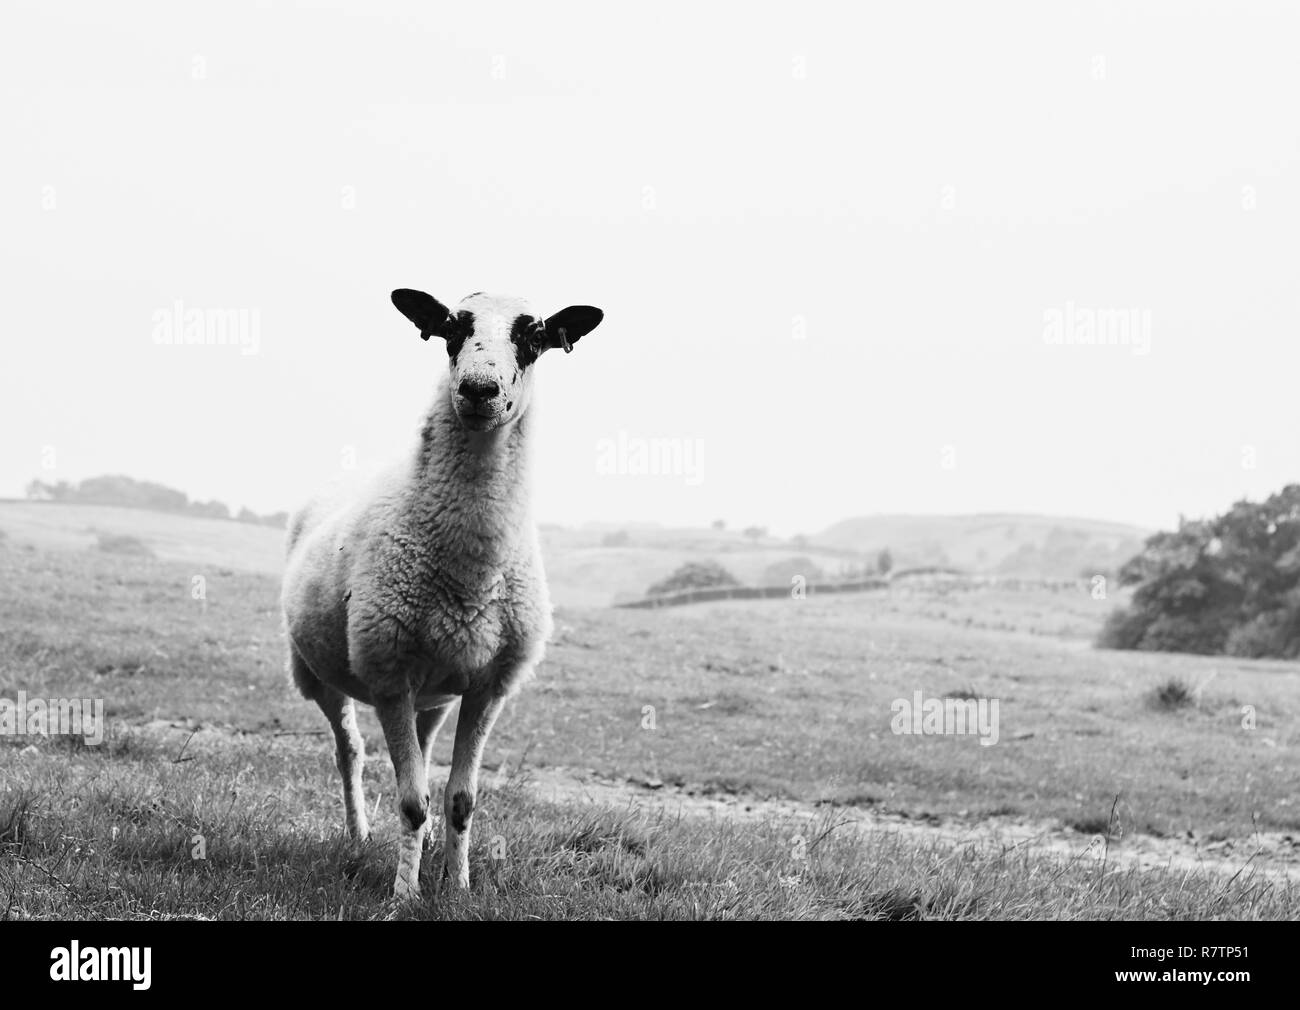 A curious looking sheep in a field head on to the camera, black and white. Stock Photo